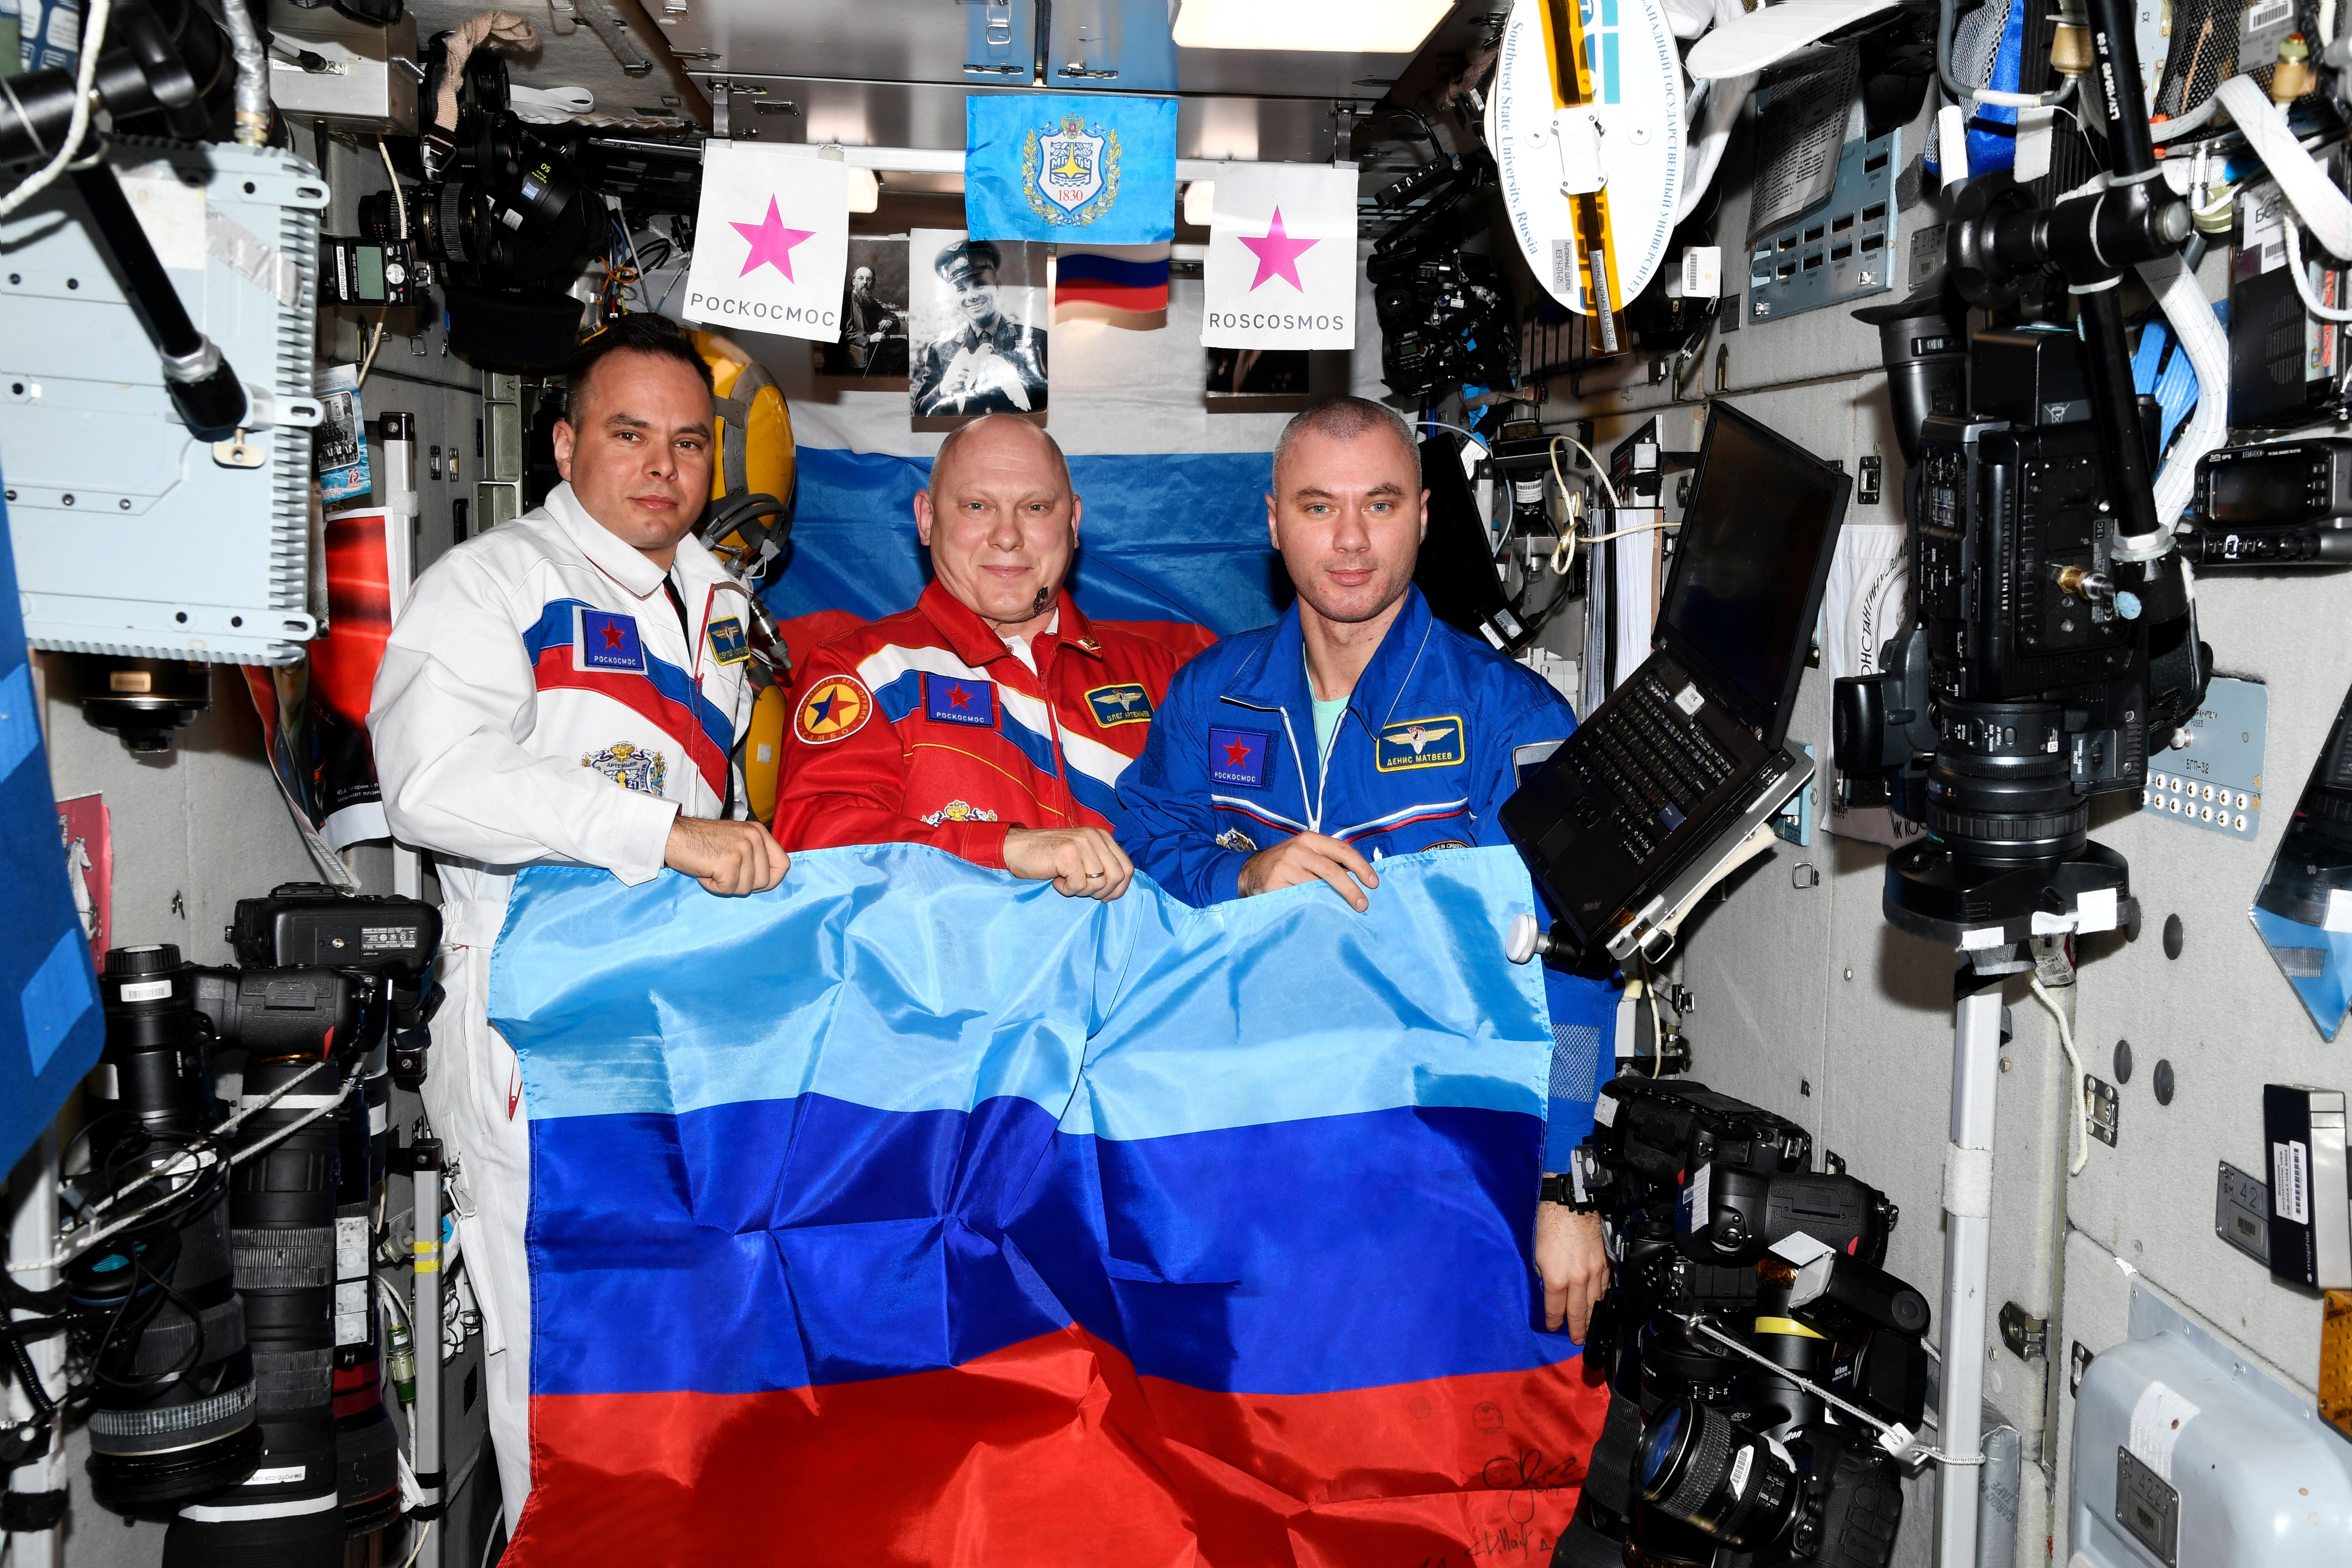 Russian cosmonauts Oleg Artemyev, Denis Matveev and Sergey Korsakov pose with a flag of the self-proclaimed Luhansk People's Republic at the International Space Station (ISS), in this picture released on July 4. 